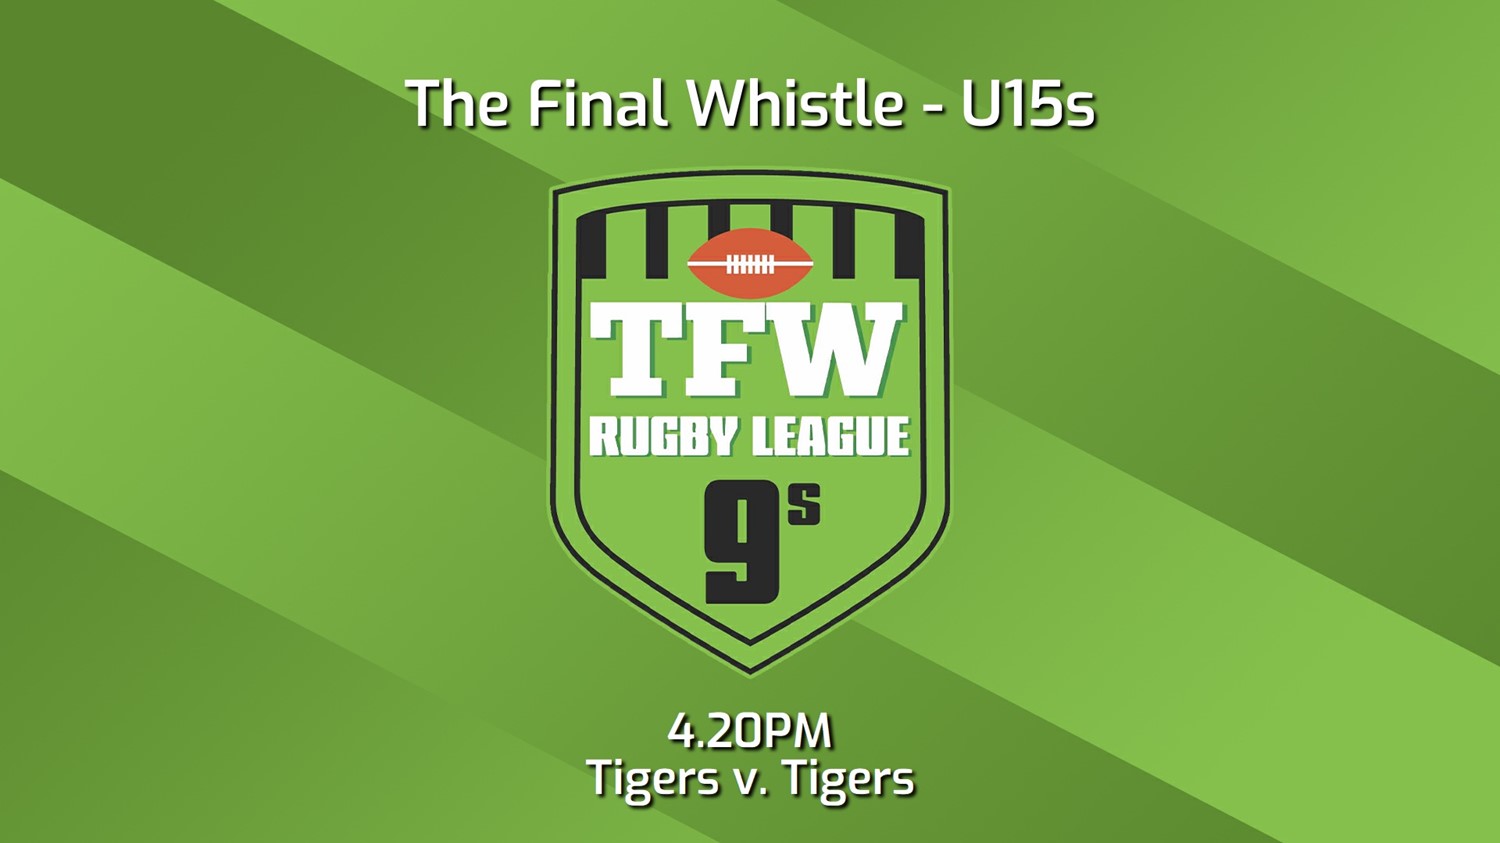 240113-Final Whistle Game 21 - U15s - TFW The Tigers v TFW Central Tigers Slate Image